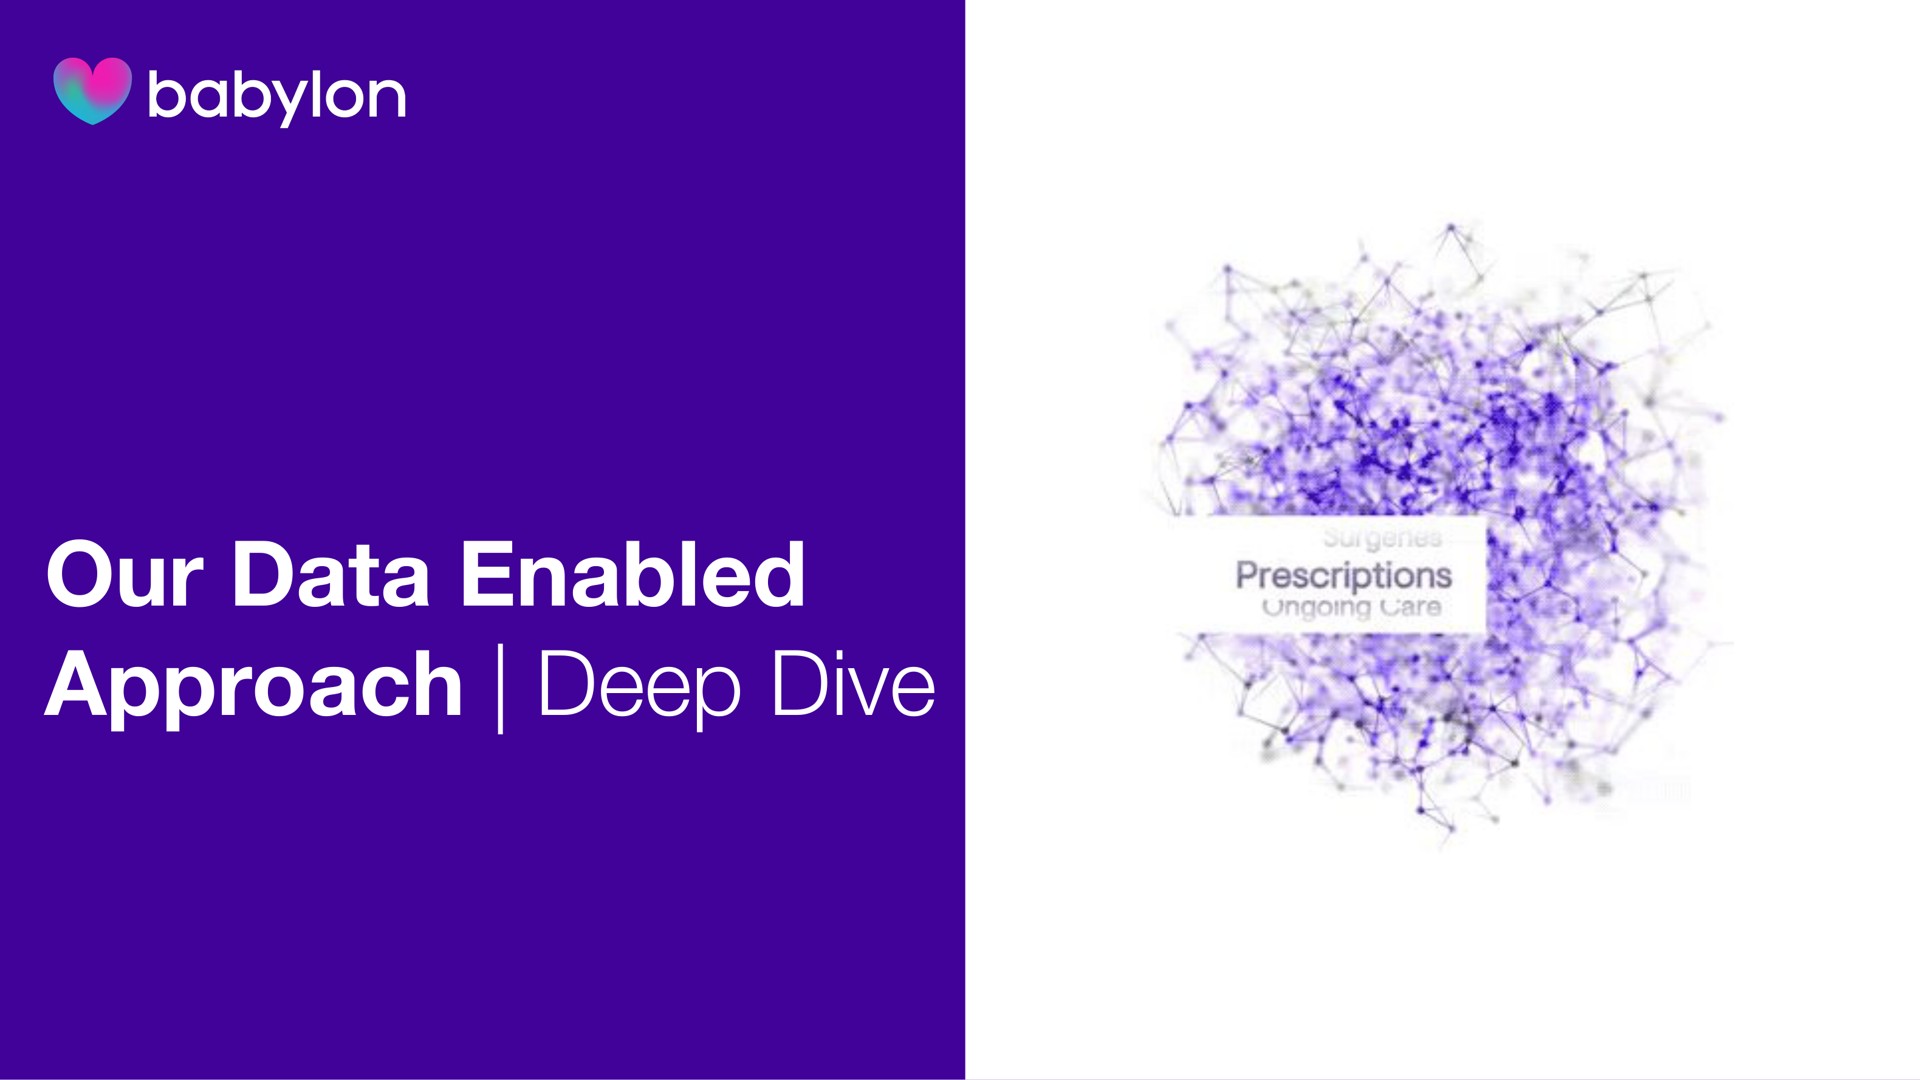 our data enabled approach deep dive | Babylon